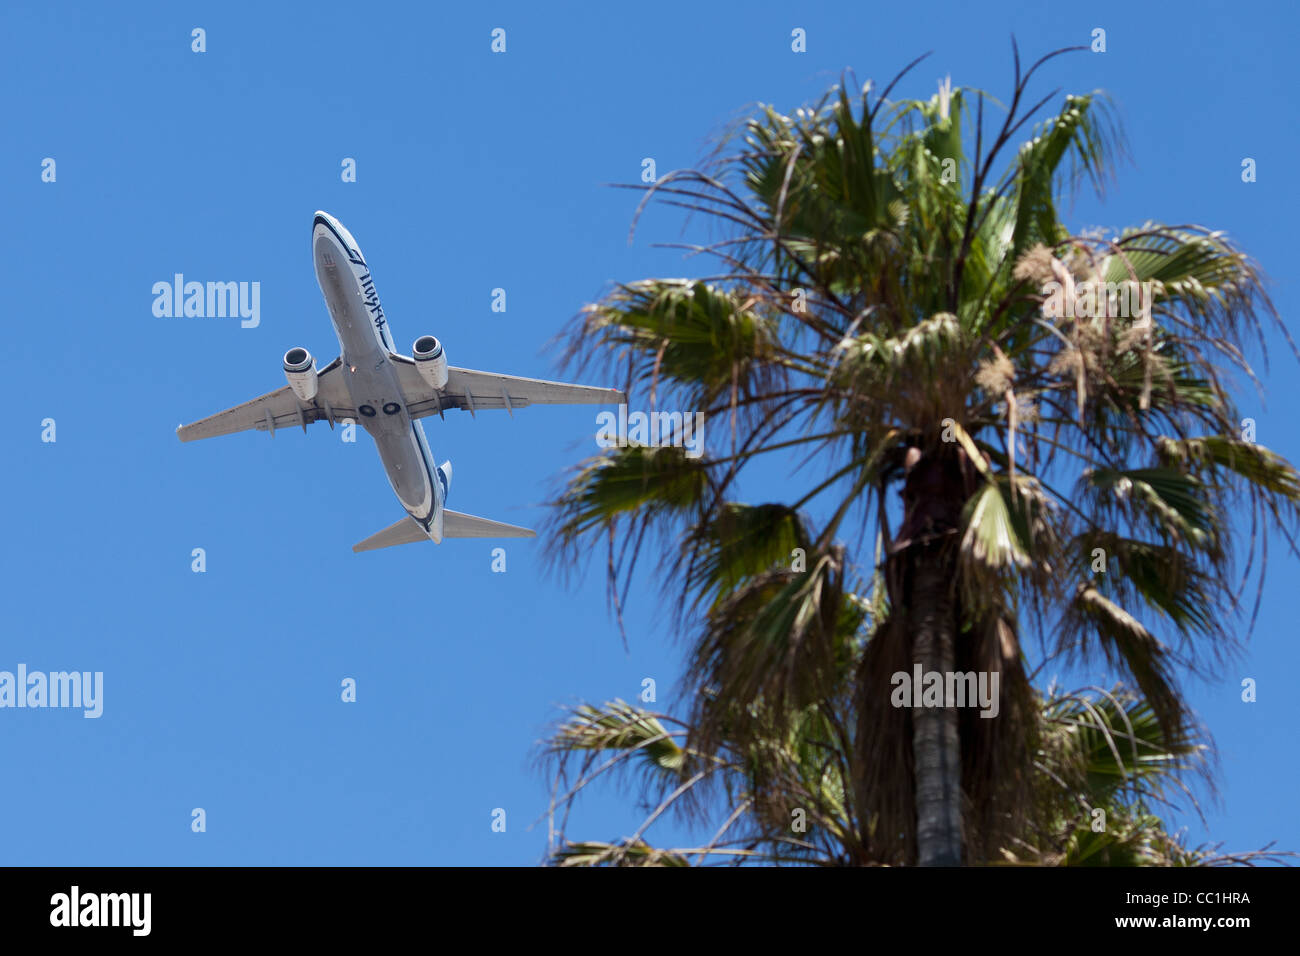 Alaska Airlines aeroplane takes off from Los Angeles airport in California Stock Photo